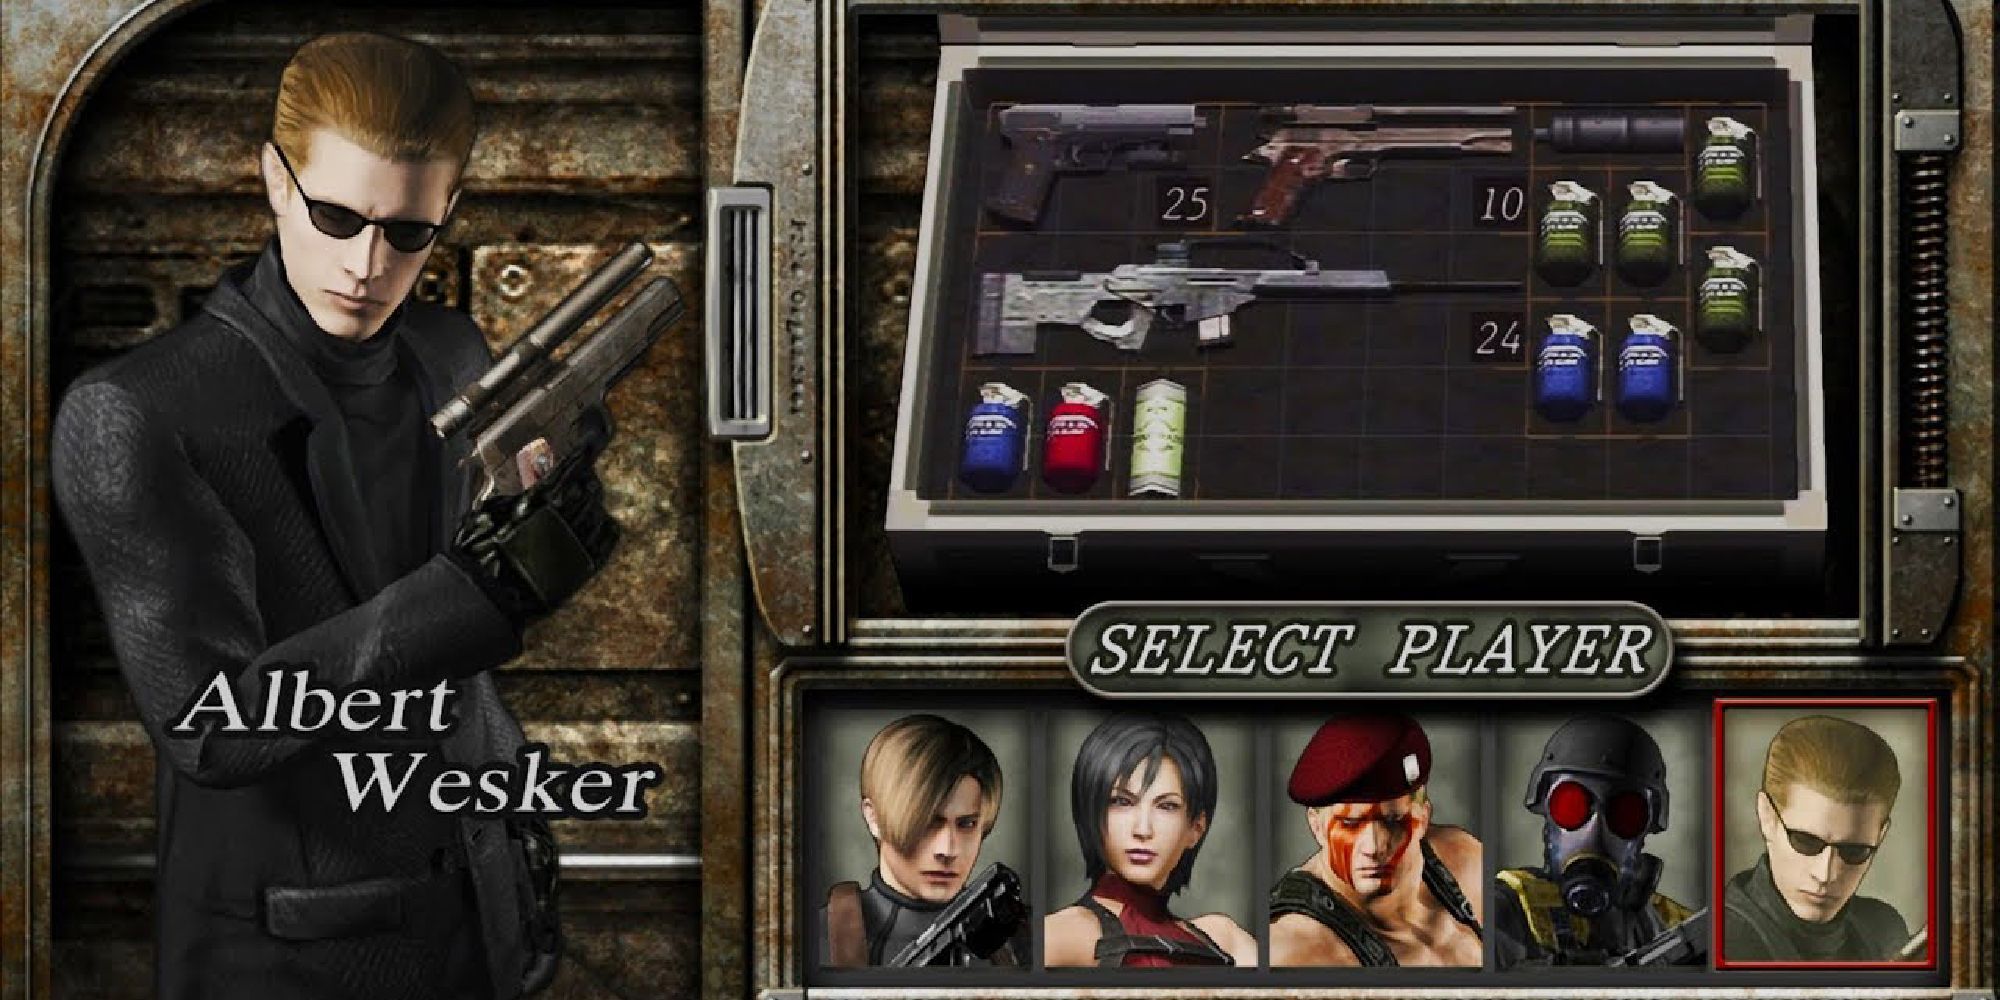 The character select screen for Mercenaries. Wesker is currenly selected.